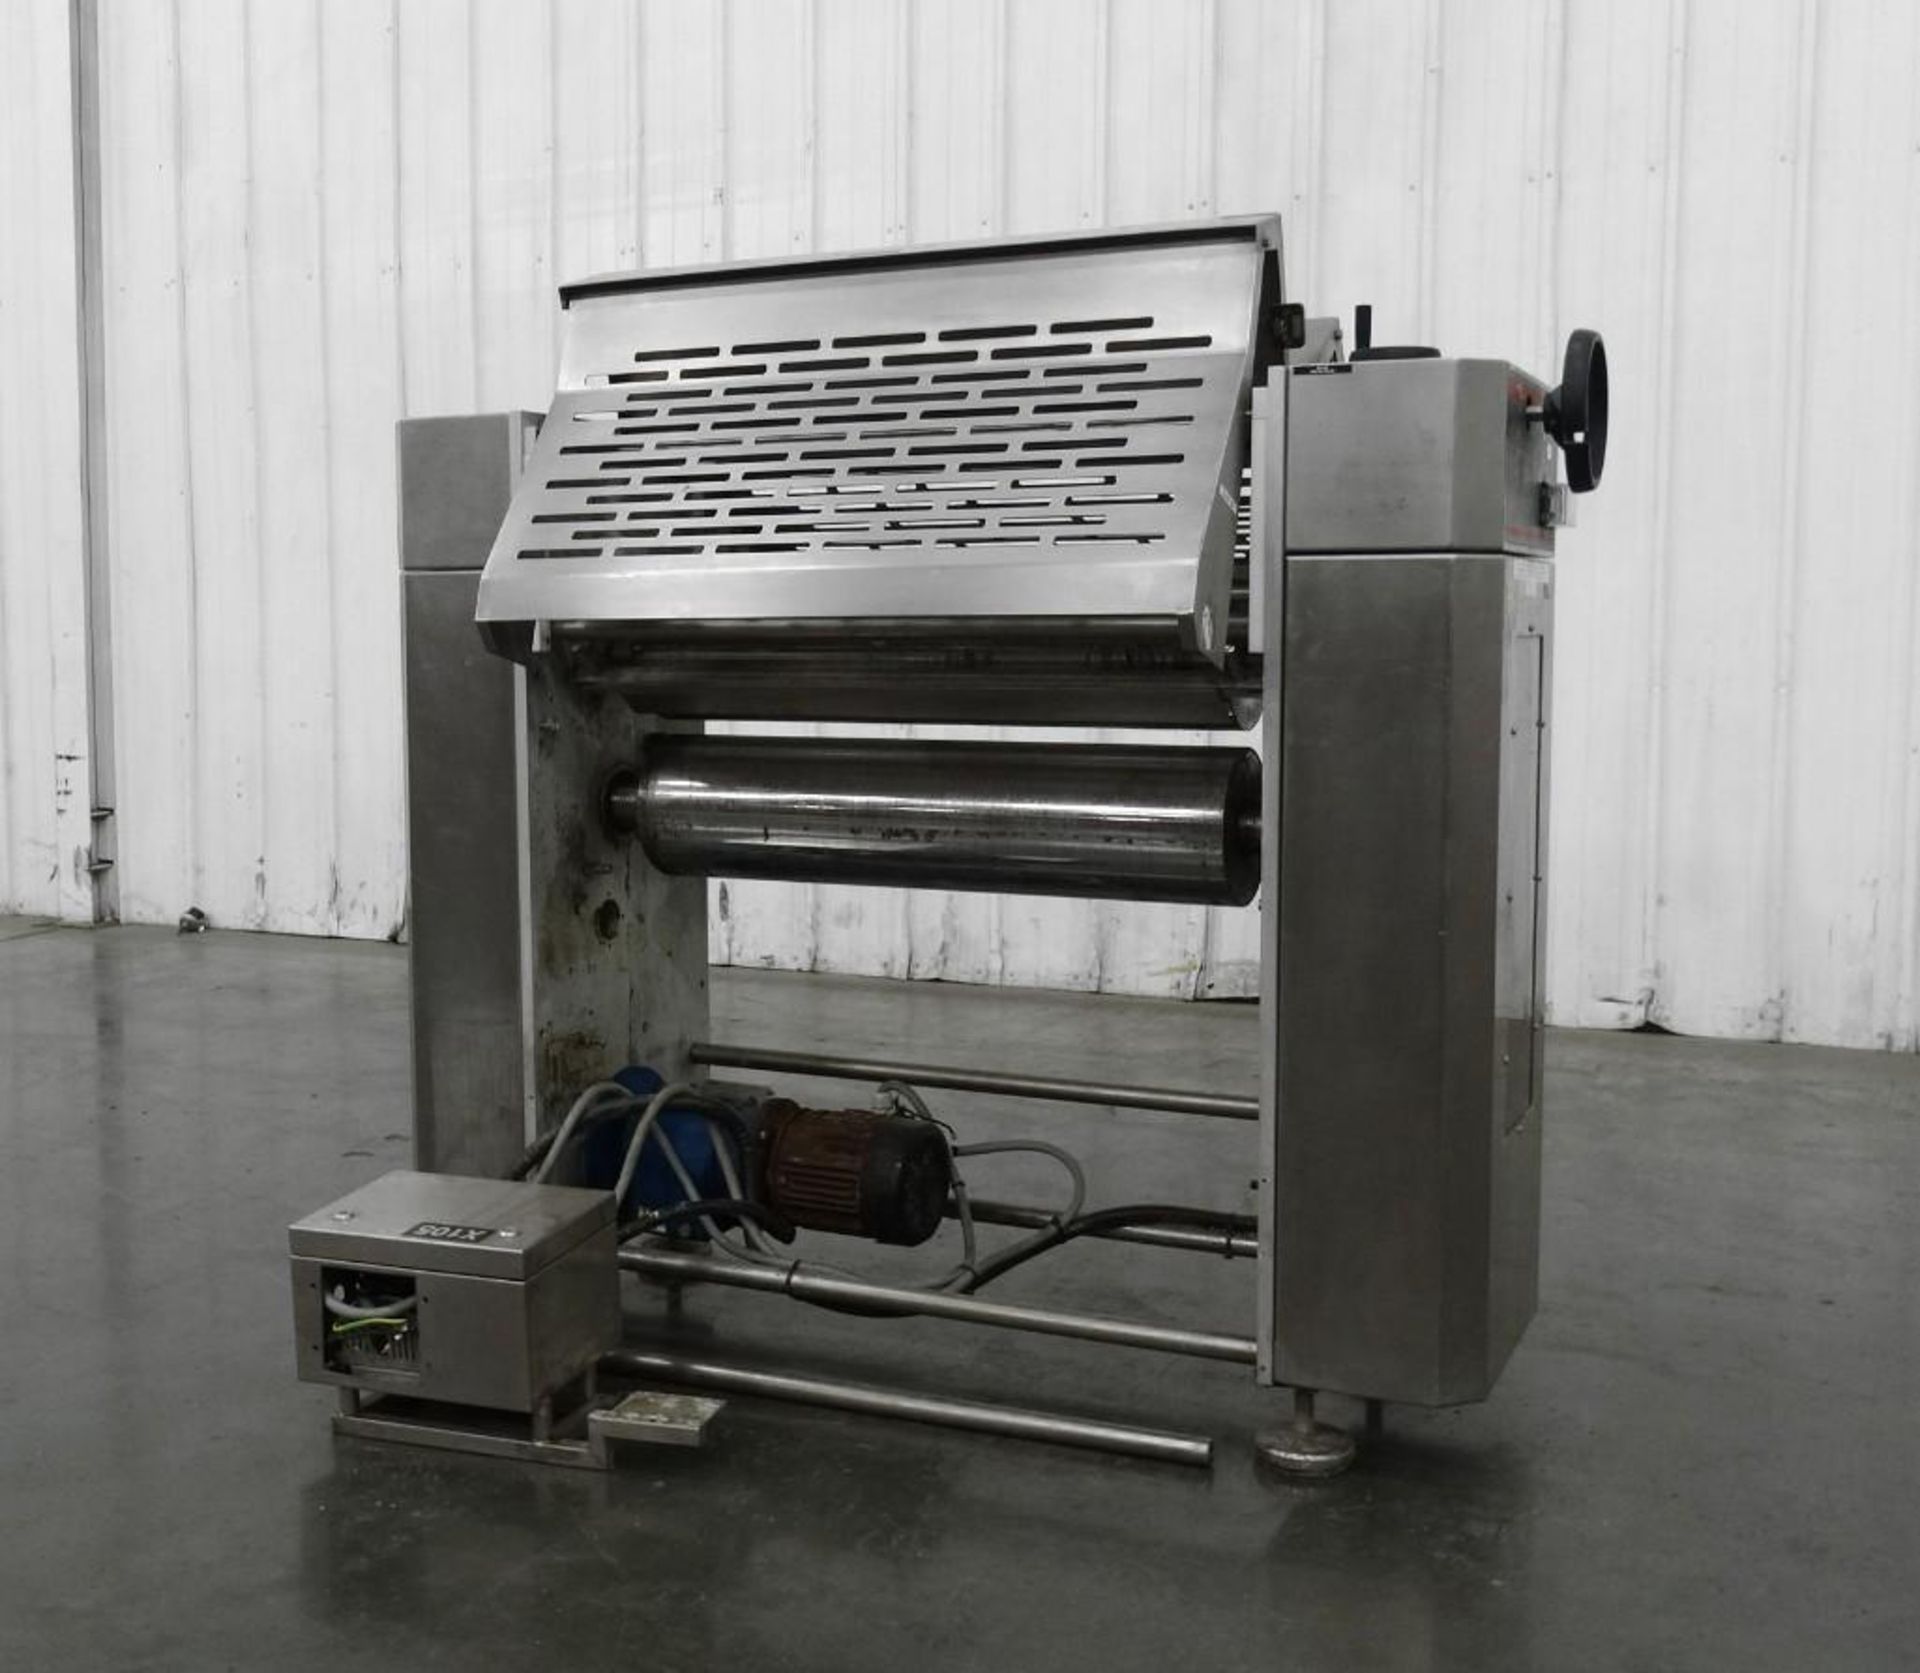 3 Stainless Steel Dough Sheeter - Image 2 of 8